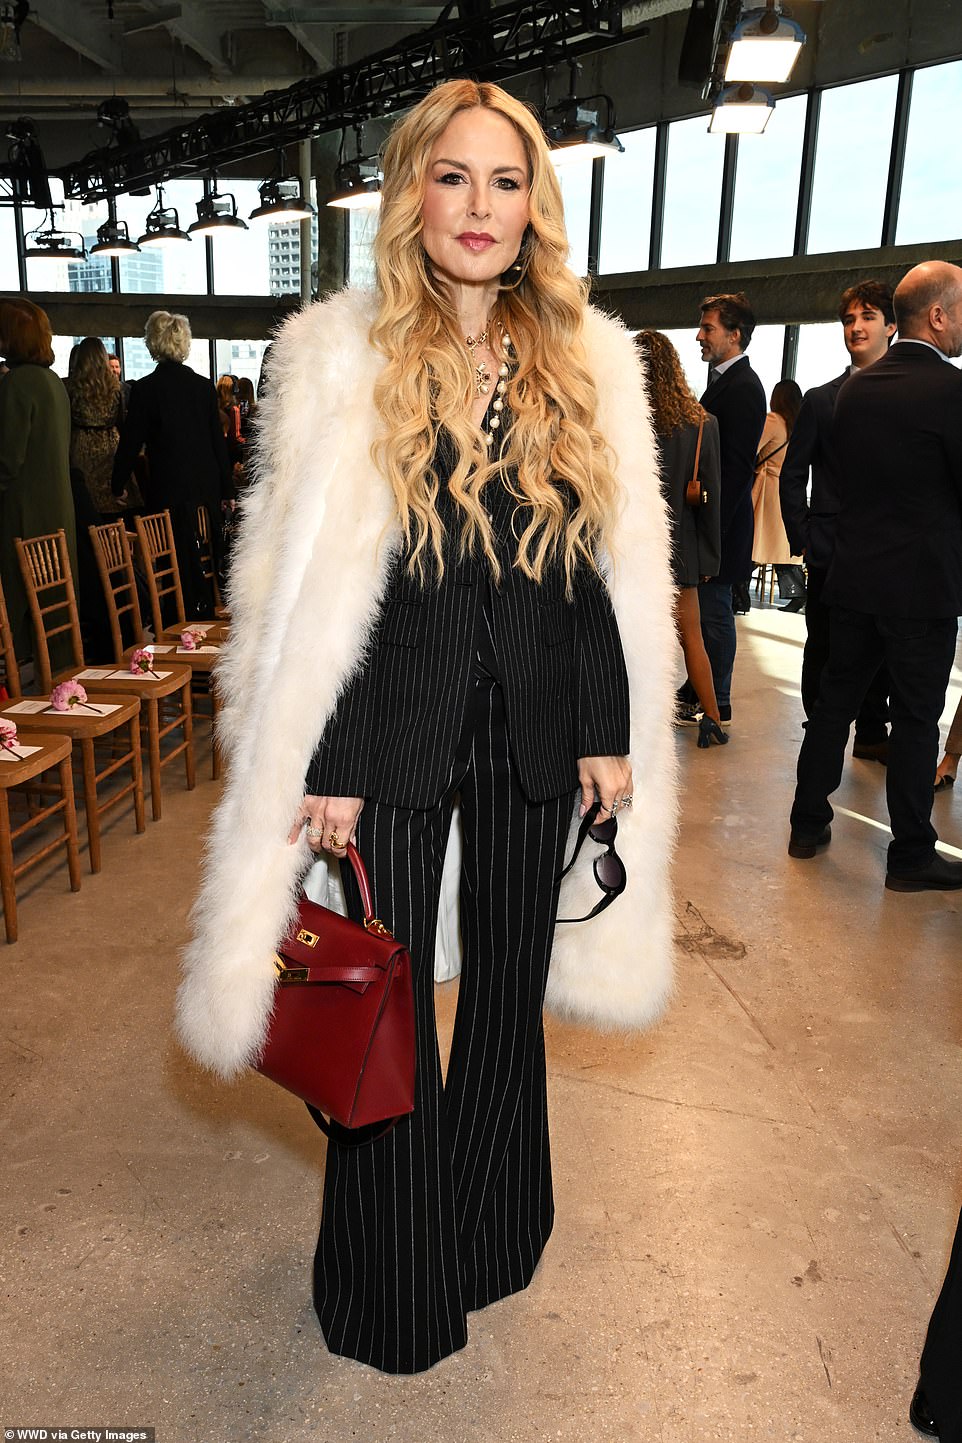 Rachel Zoe wore a striped-print look, which consisted of a jacket and flared pants, with a fur coat layered on top.